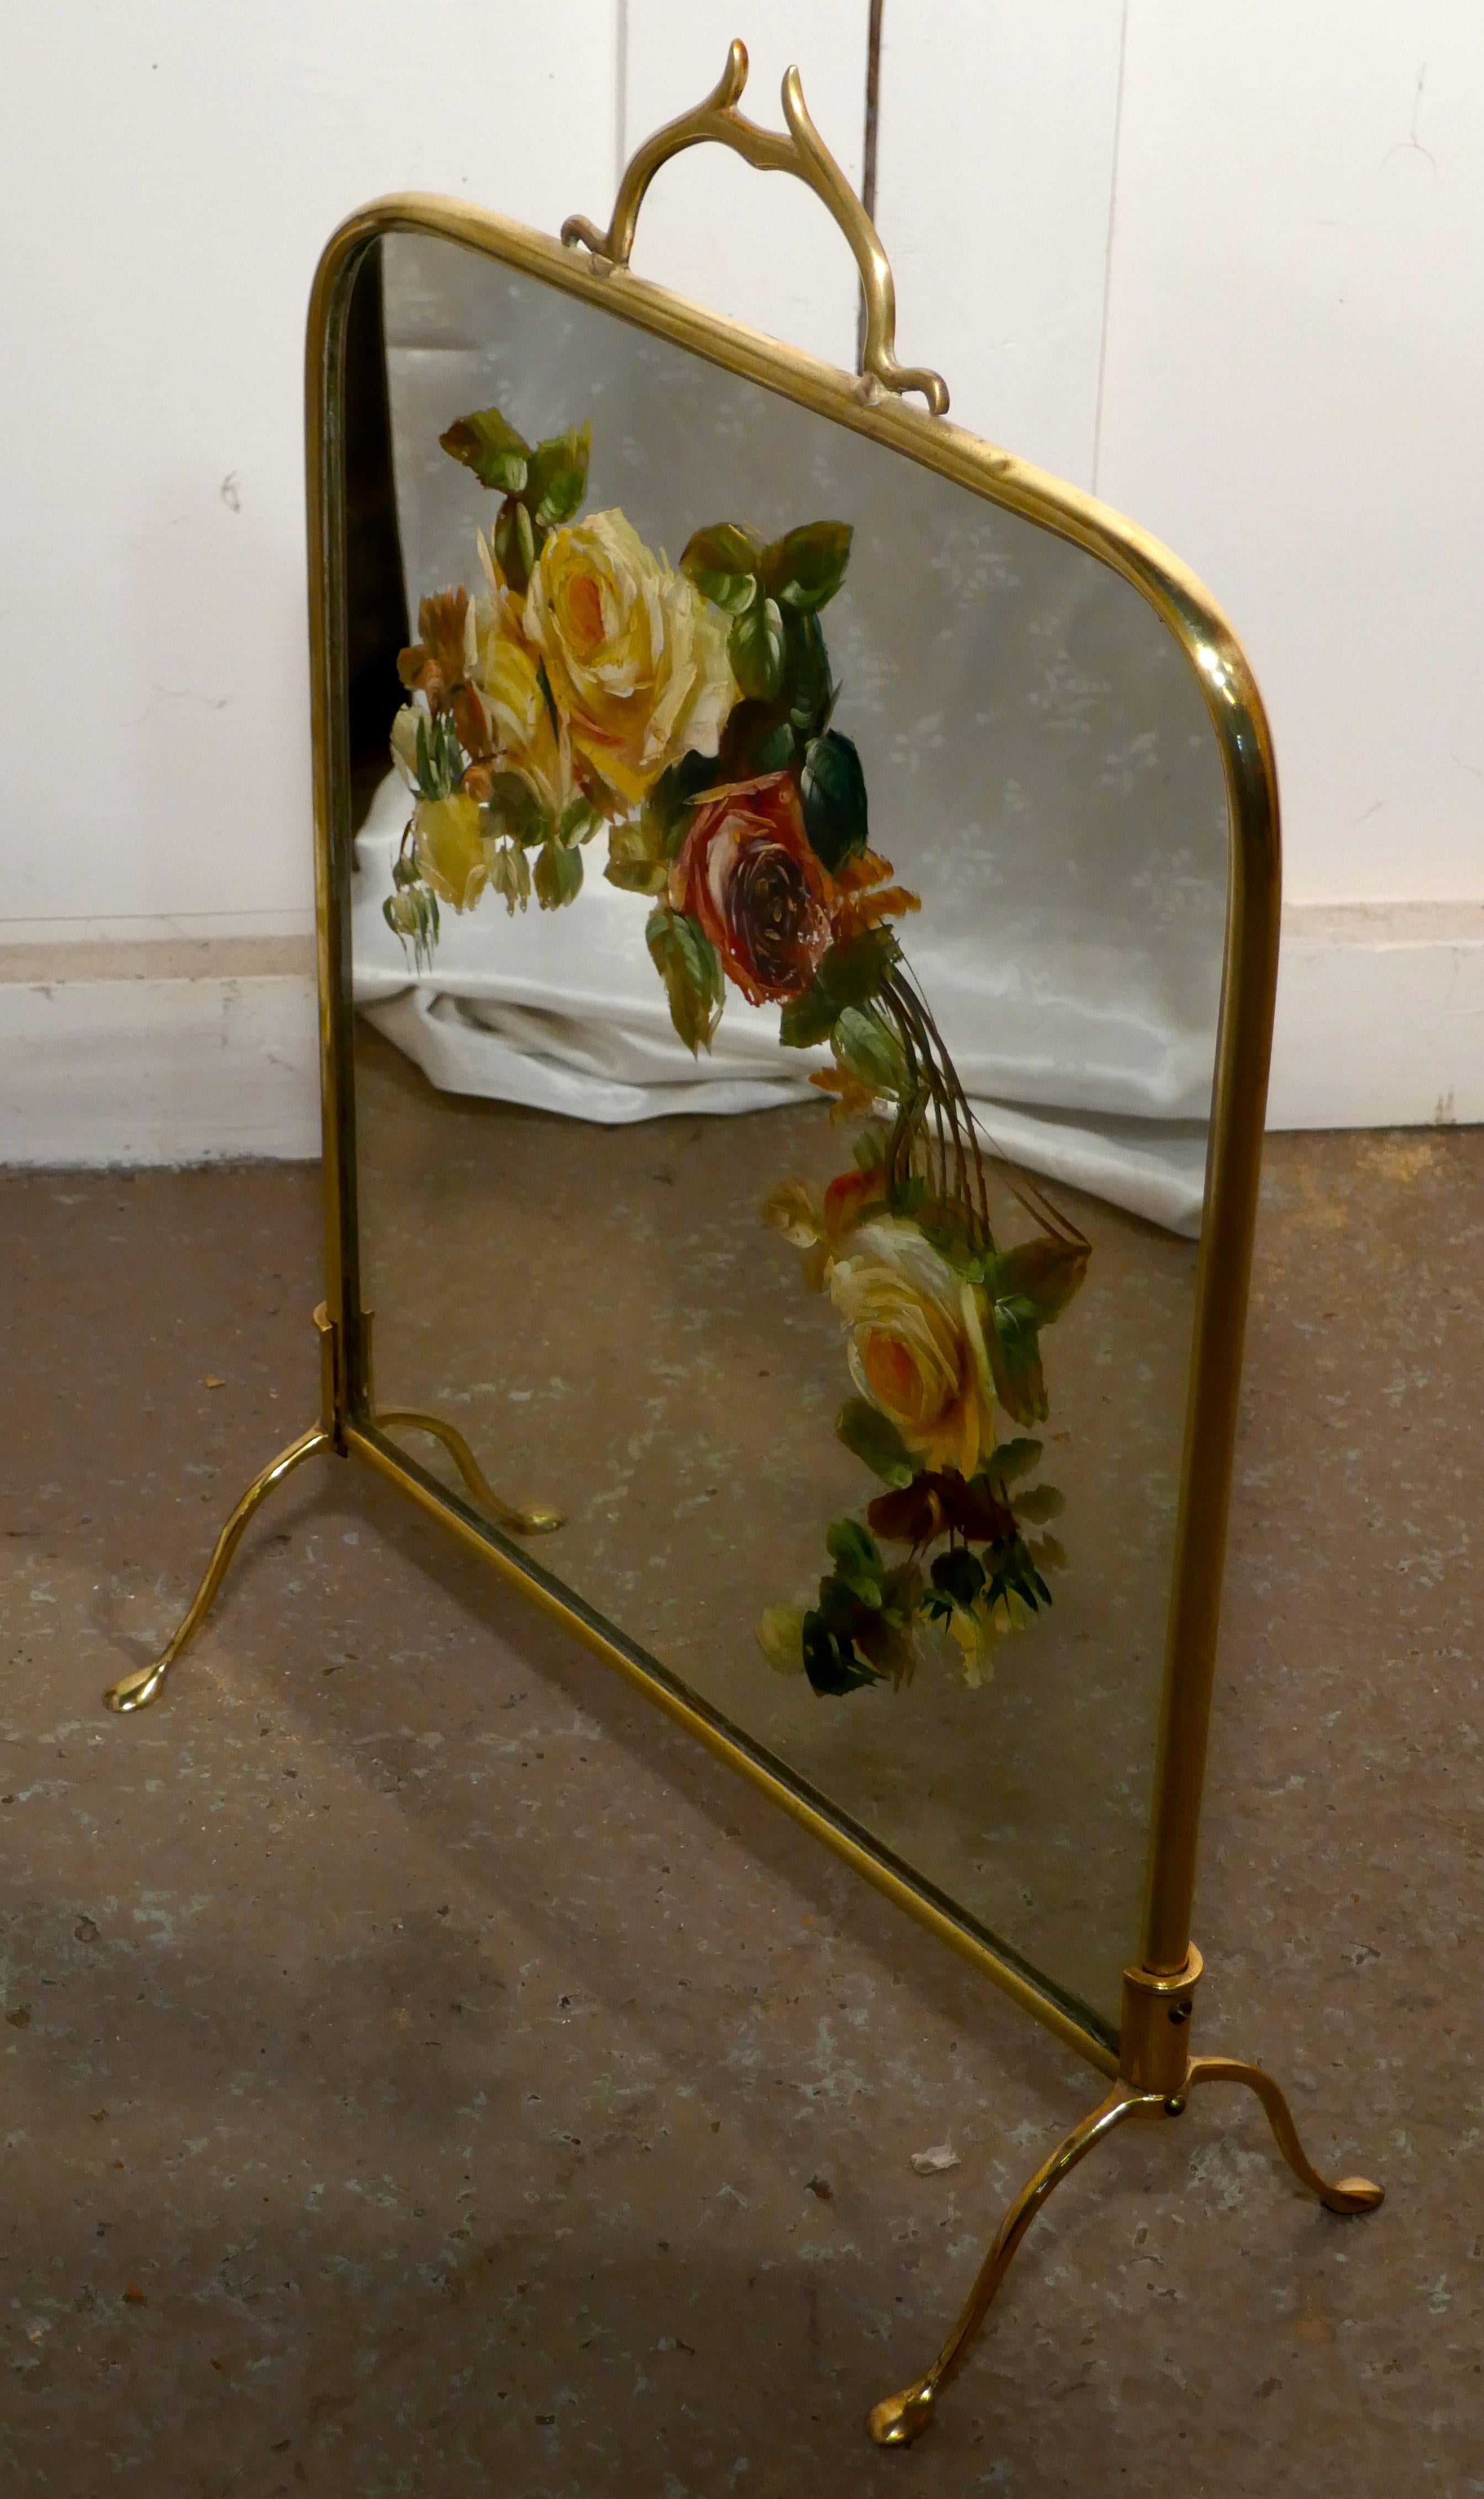 A Victorian brass and roses painted mirror fire screen

This is a most decorative fire screen it has a brass stand, the mirror is painted with large colorful roses.
The screen is in good sound condition, but there is a very little wear of the